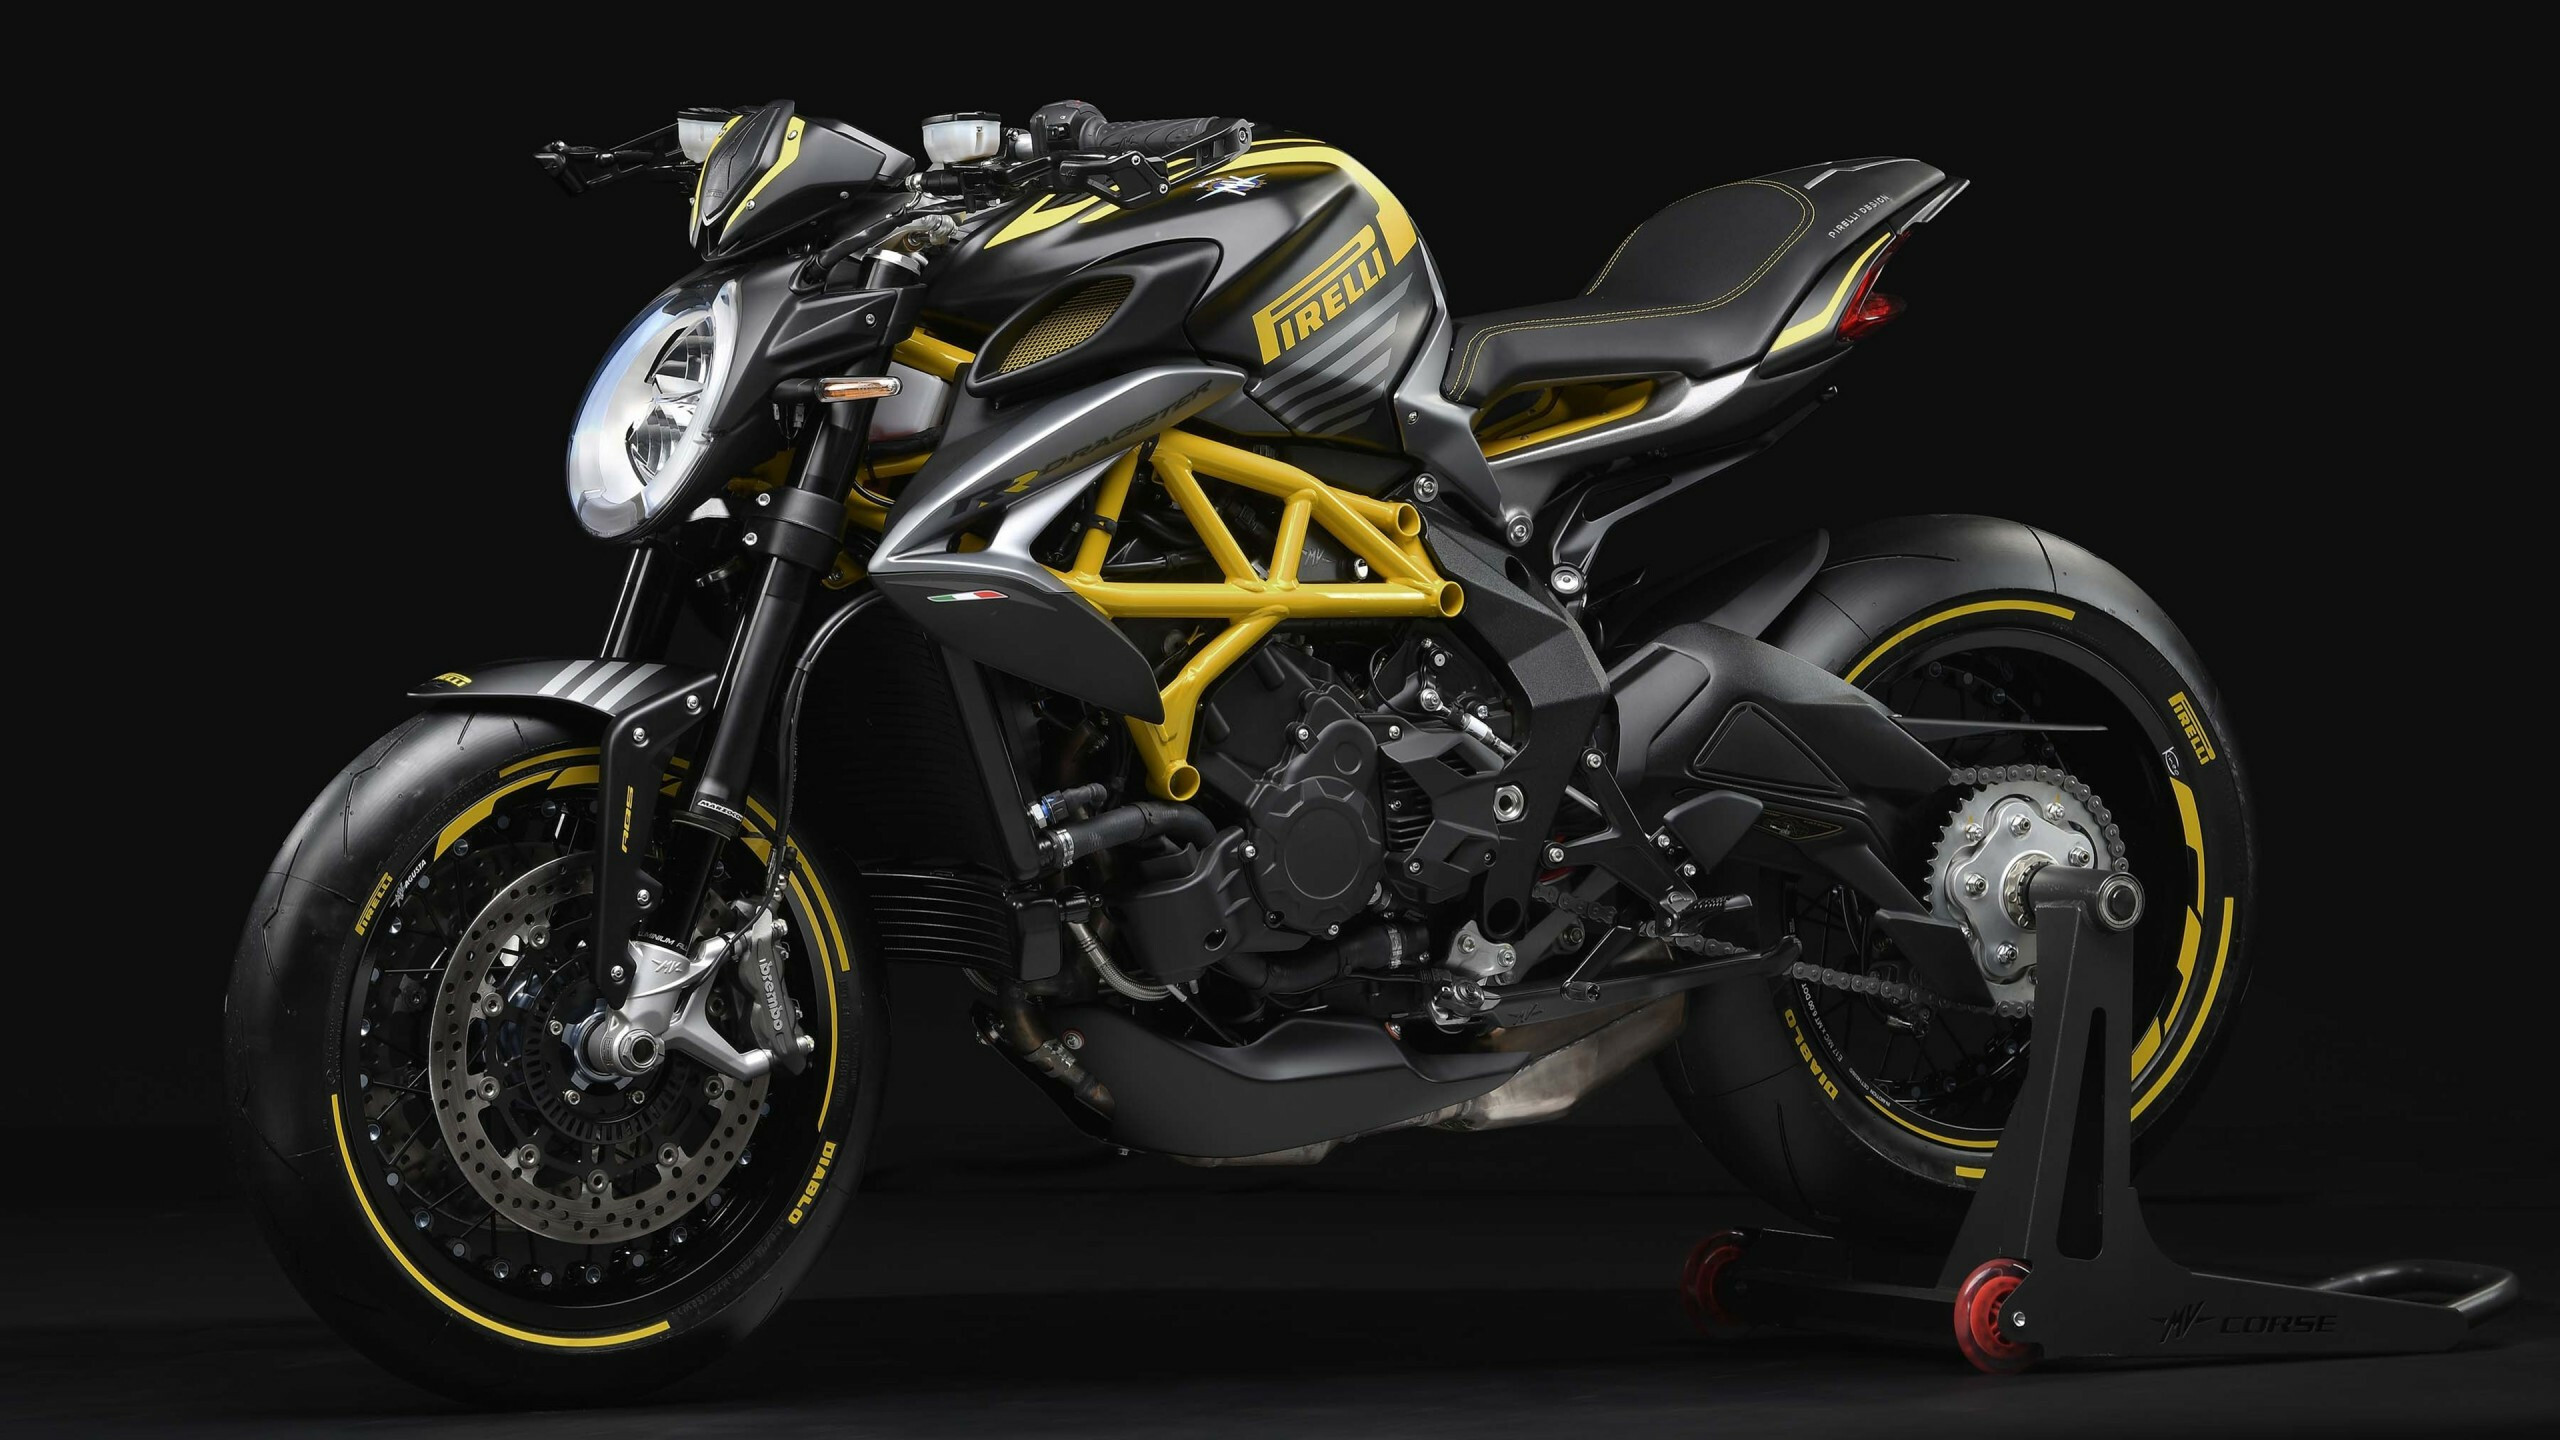 MV Agusta: Brutale 800 Rr Pirelli, A limited-edition model produced in collaboration with Pirelli and based on the 800 RR. 2560x1440 HD Wallpaper.